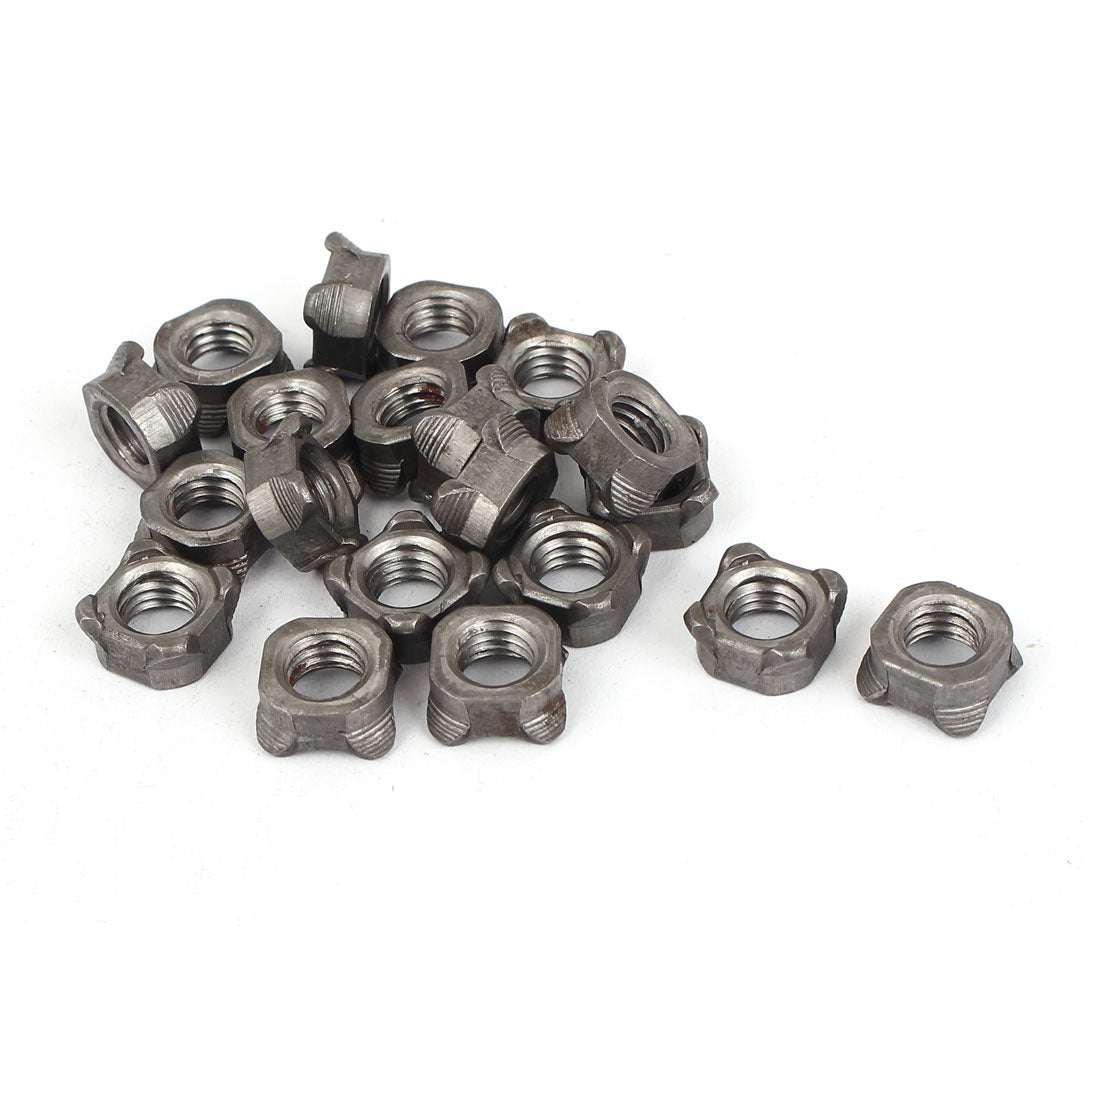 Uxcell Uxcell Weld Nuts,M8 Square UNC Carbon Steel Machine Screw Gray 20Pcs